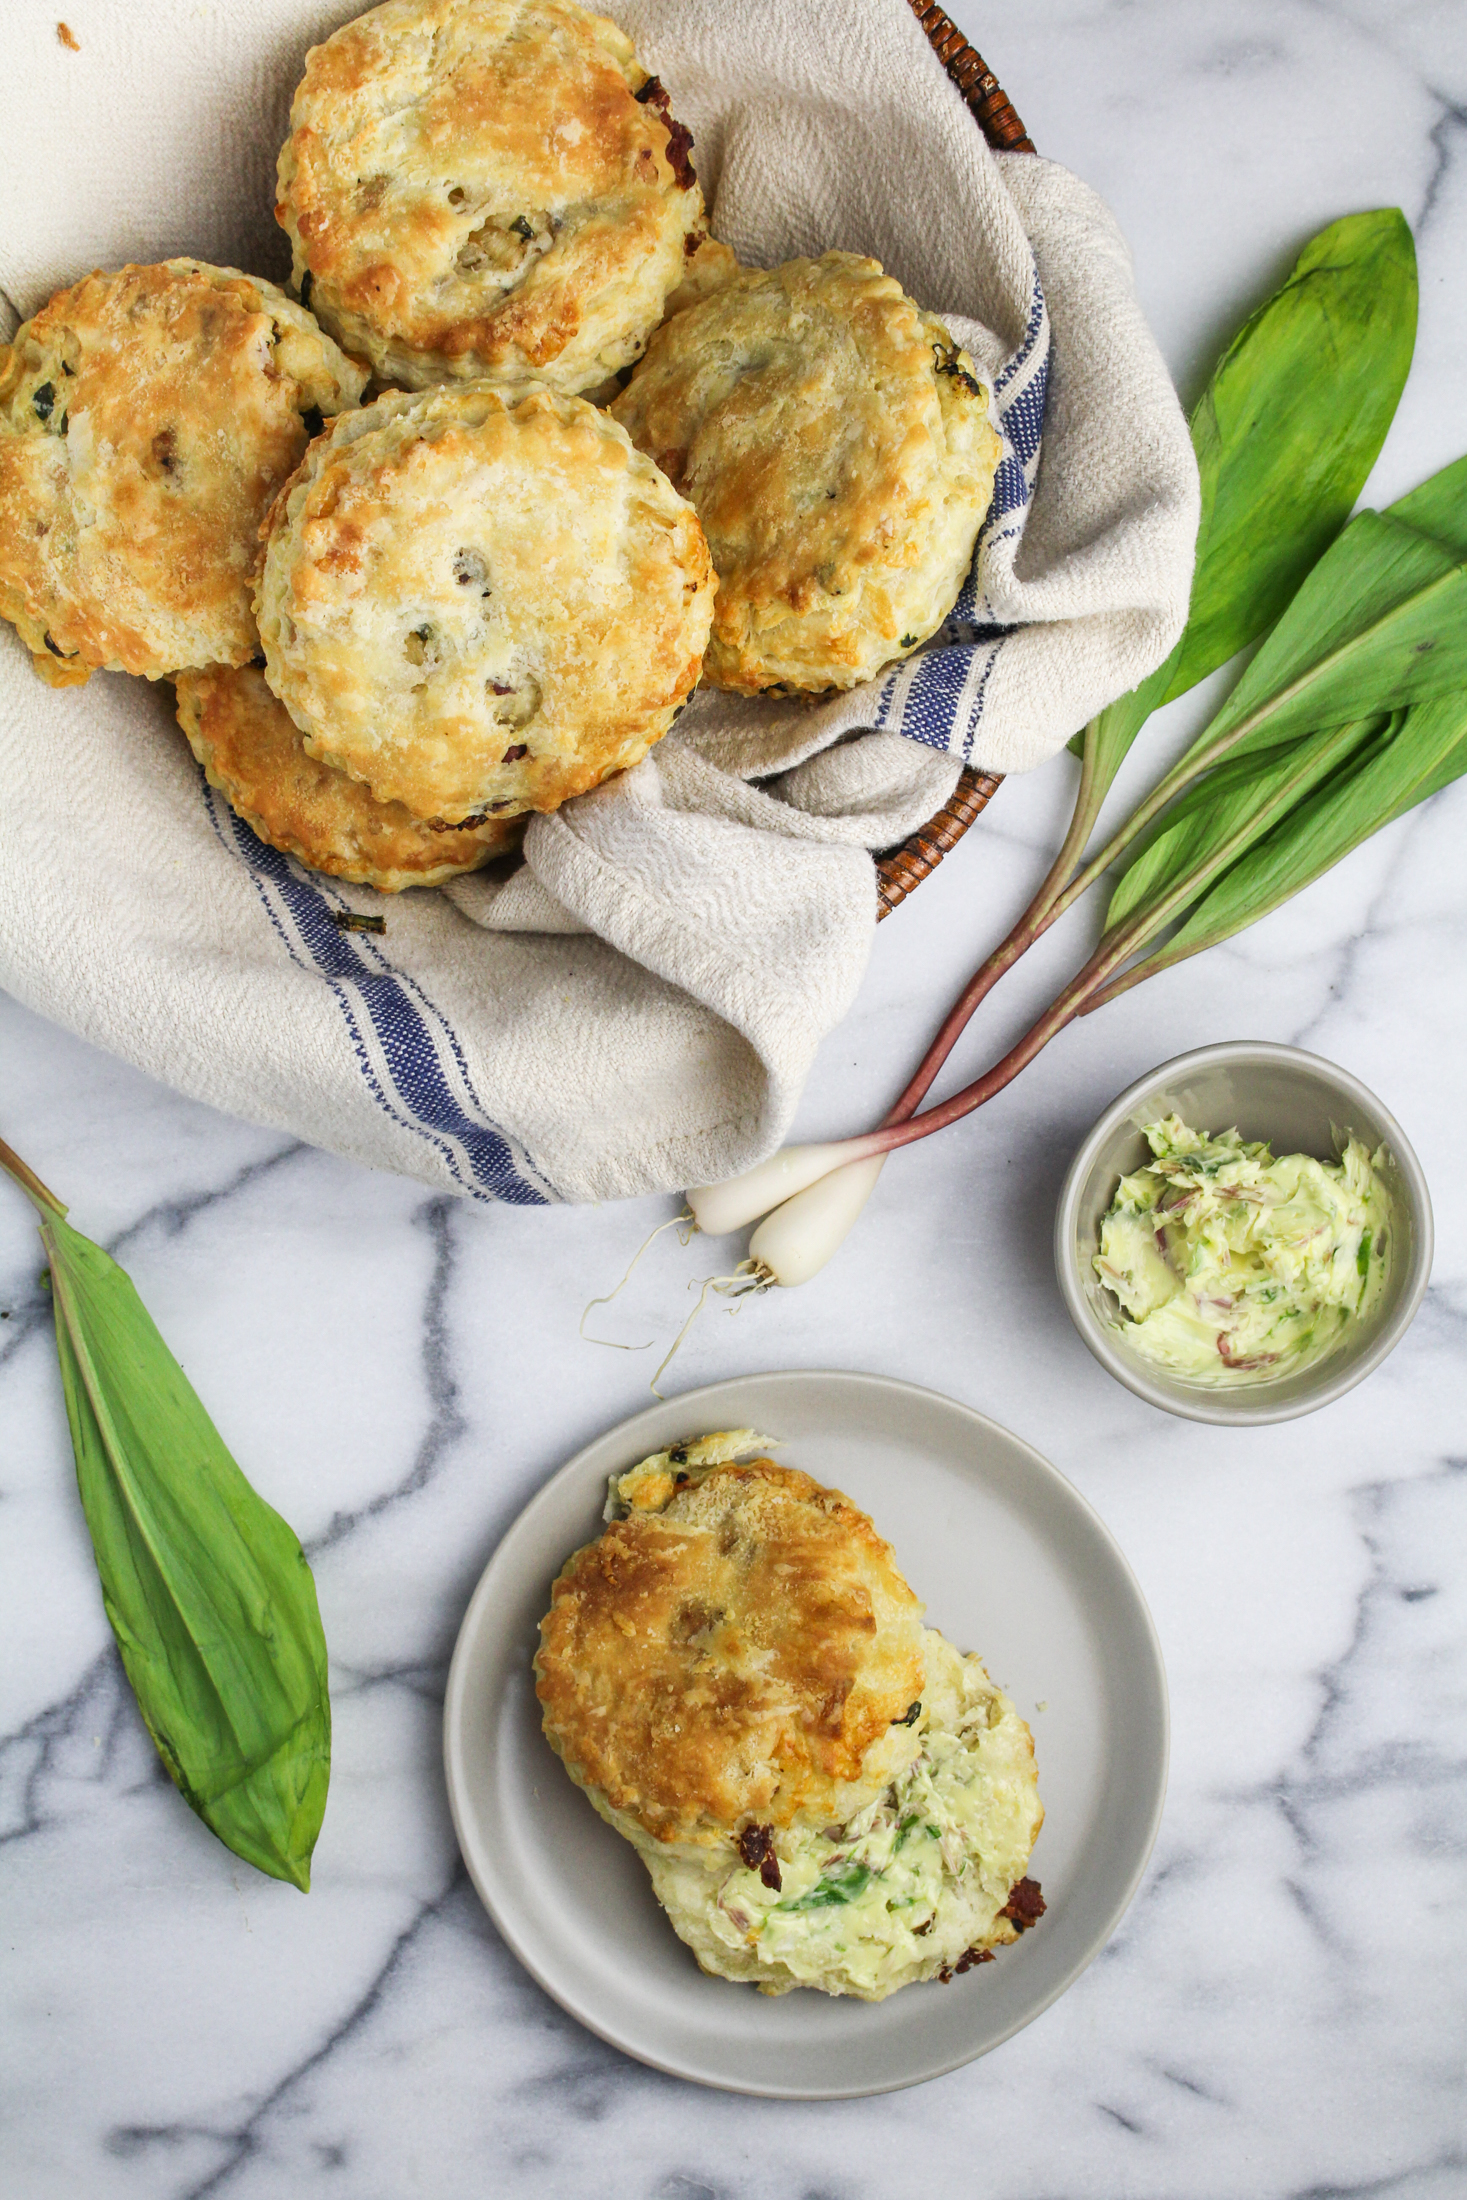 Ramp, Cheddar, and Bacon Buttermilk Biscuits {Katie at the Kitchen Door}